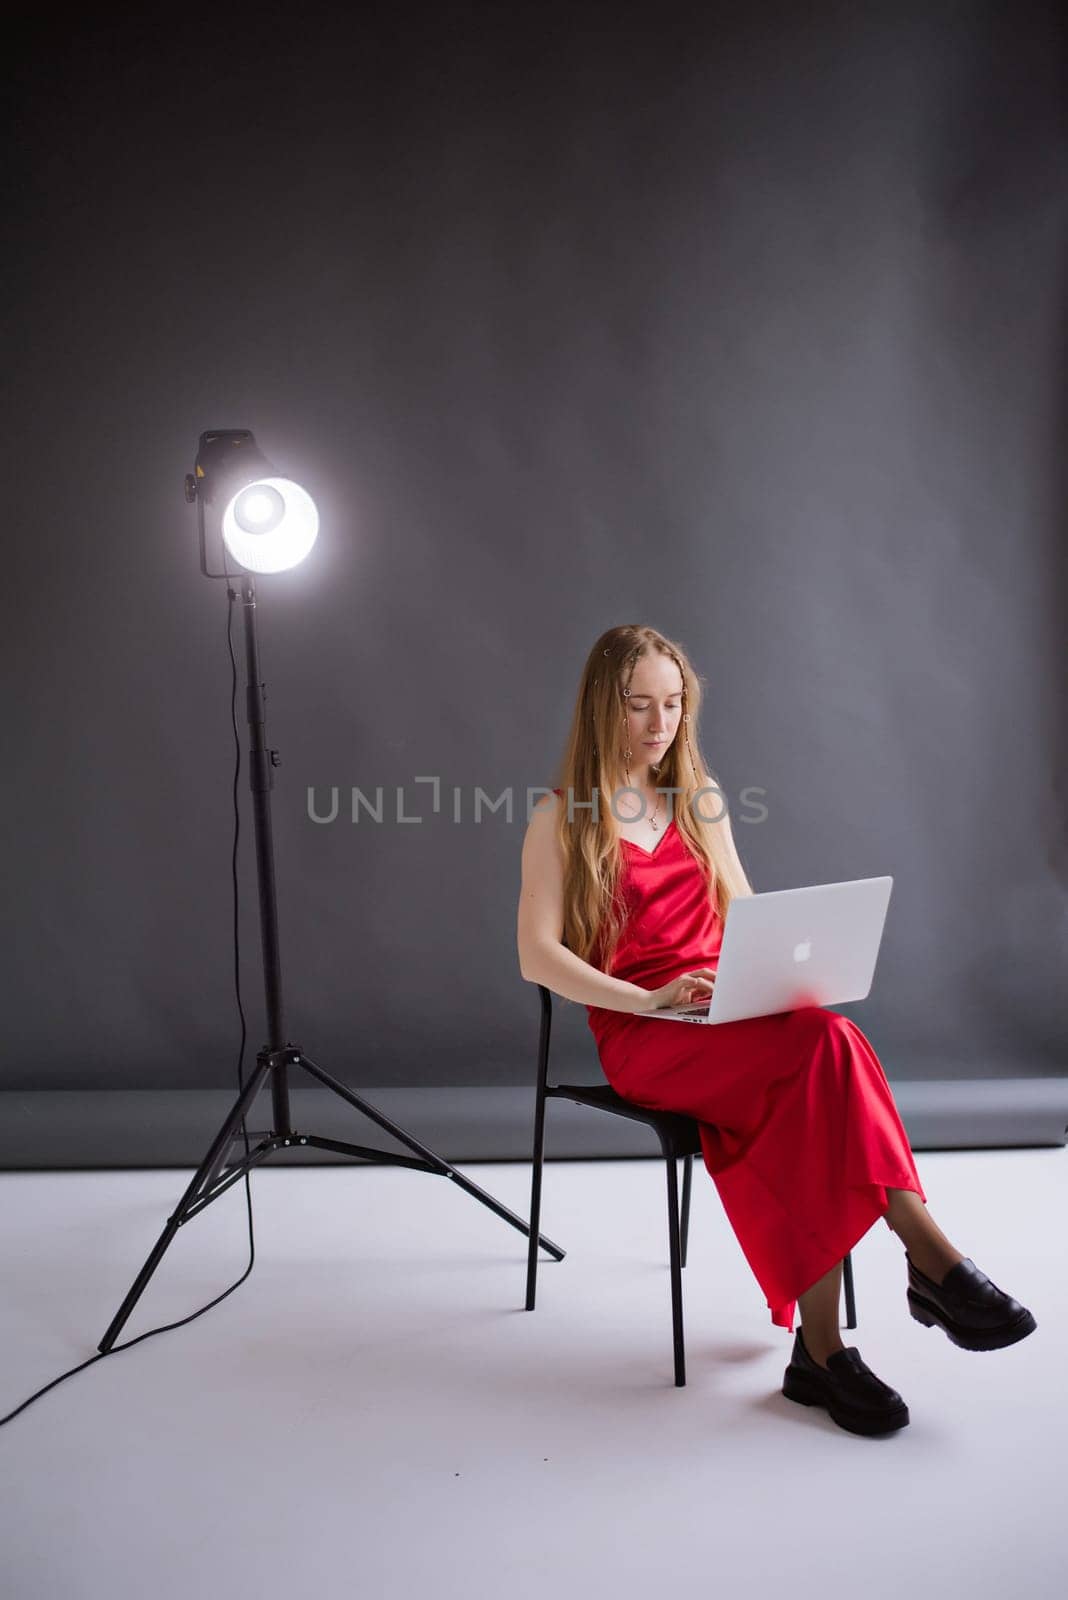 A business woman blogger in a red dress is working, typing on a laptop apple and sitting on a chair. portrait blonde assistant of hands with computer MacBook . Vertical